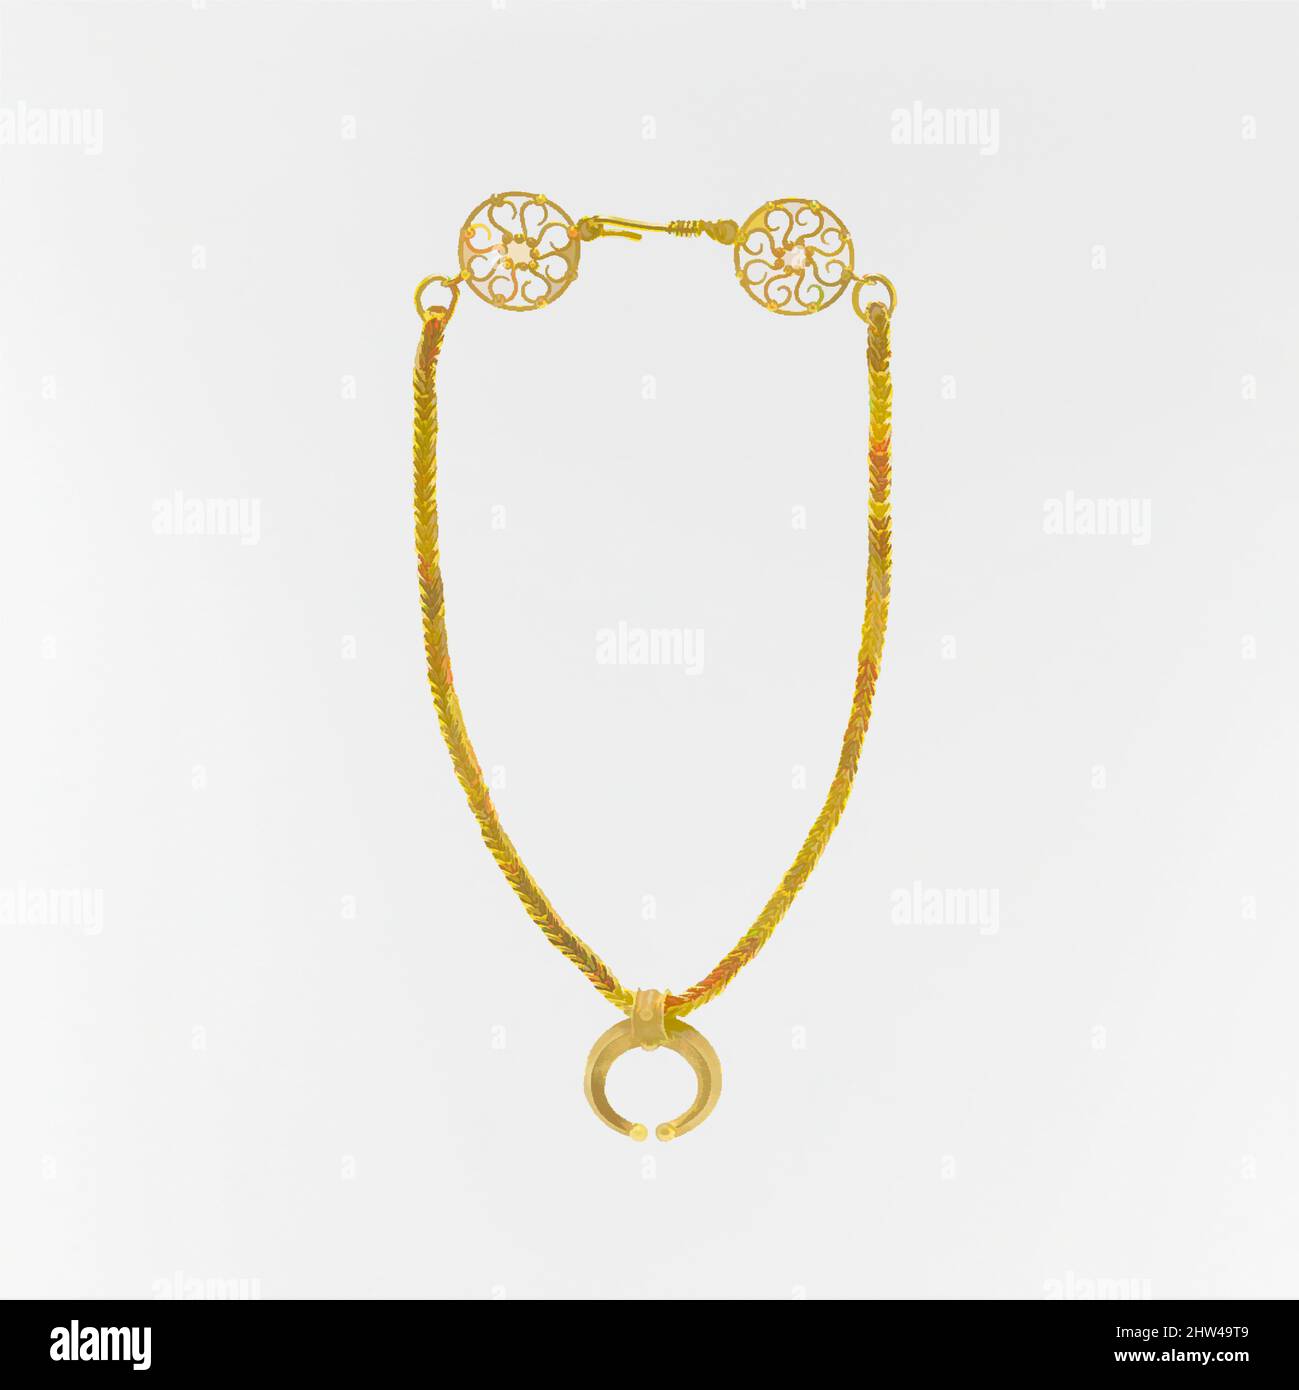 Art inspired by Gold necklace with crescent-shaped pendant, Imperial, 1st–3rd century A.D., Roman, Gold, Other: 14 1/2 in. (36.8 cm), Gold and Silver, Some styles of Roman jewelry were both very long-lived and used throughout the Empire. The wheel-shaped finials and the crescent, Classic works modernized by Artotop with a splash of modernity. Shapes, color and value, eye-catching visual impact on art. Emotions through freedom of artworks in a contemporary way. A timeless message pursuing a wildly creative new direction. Artists turning to the digital medium and creating the Artotop NFT Stock Photo